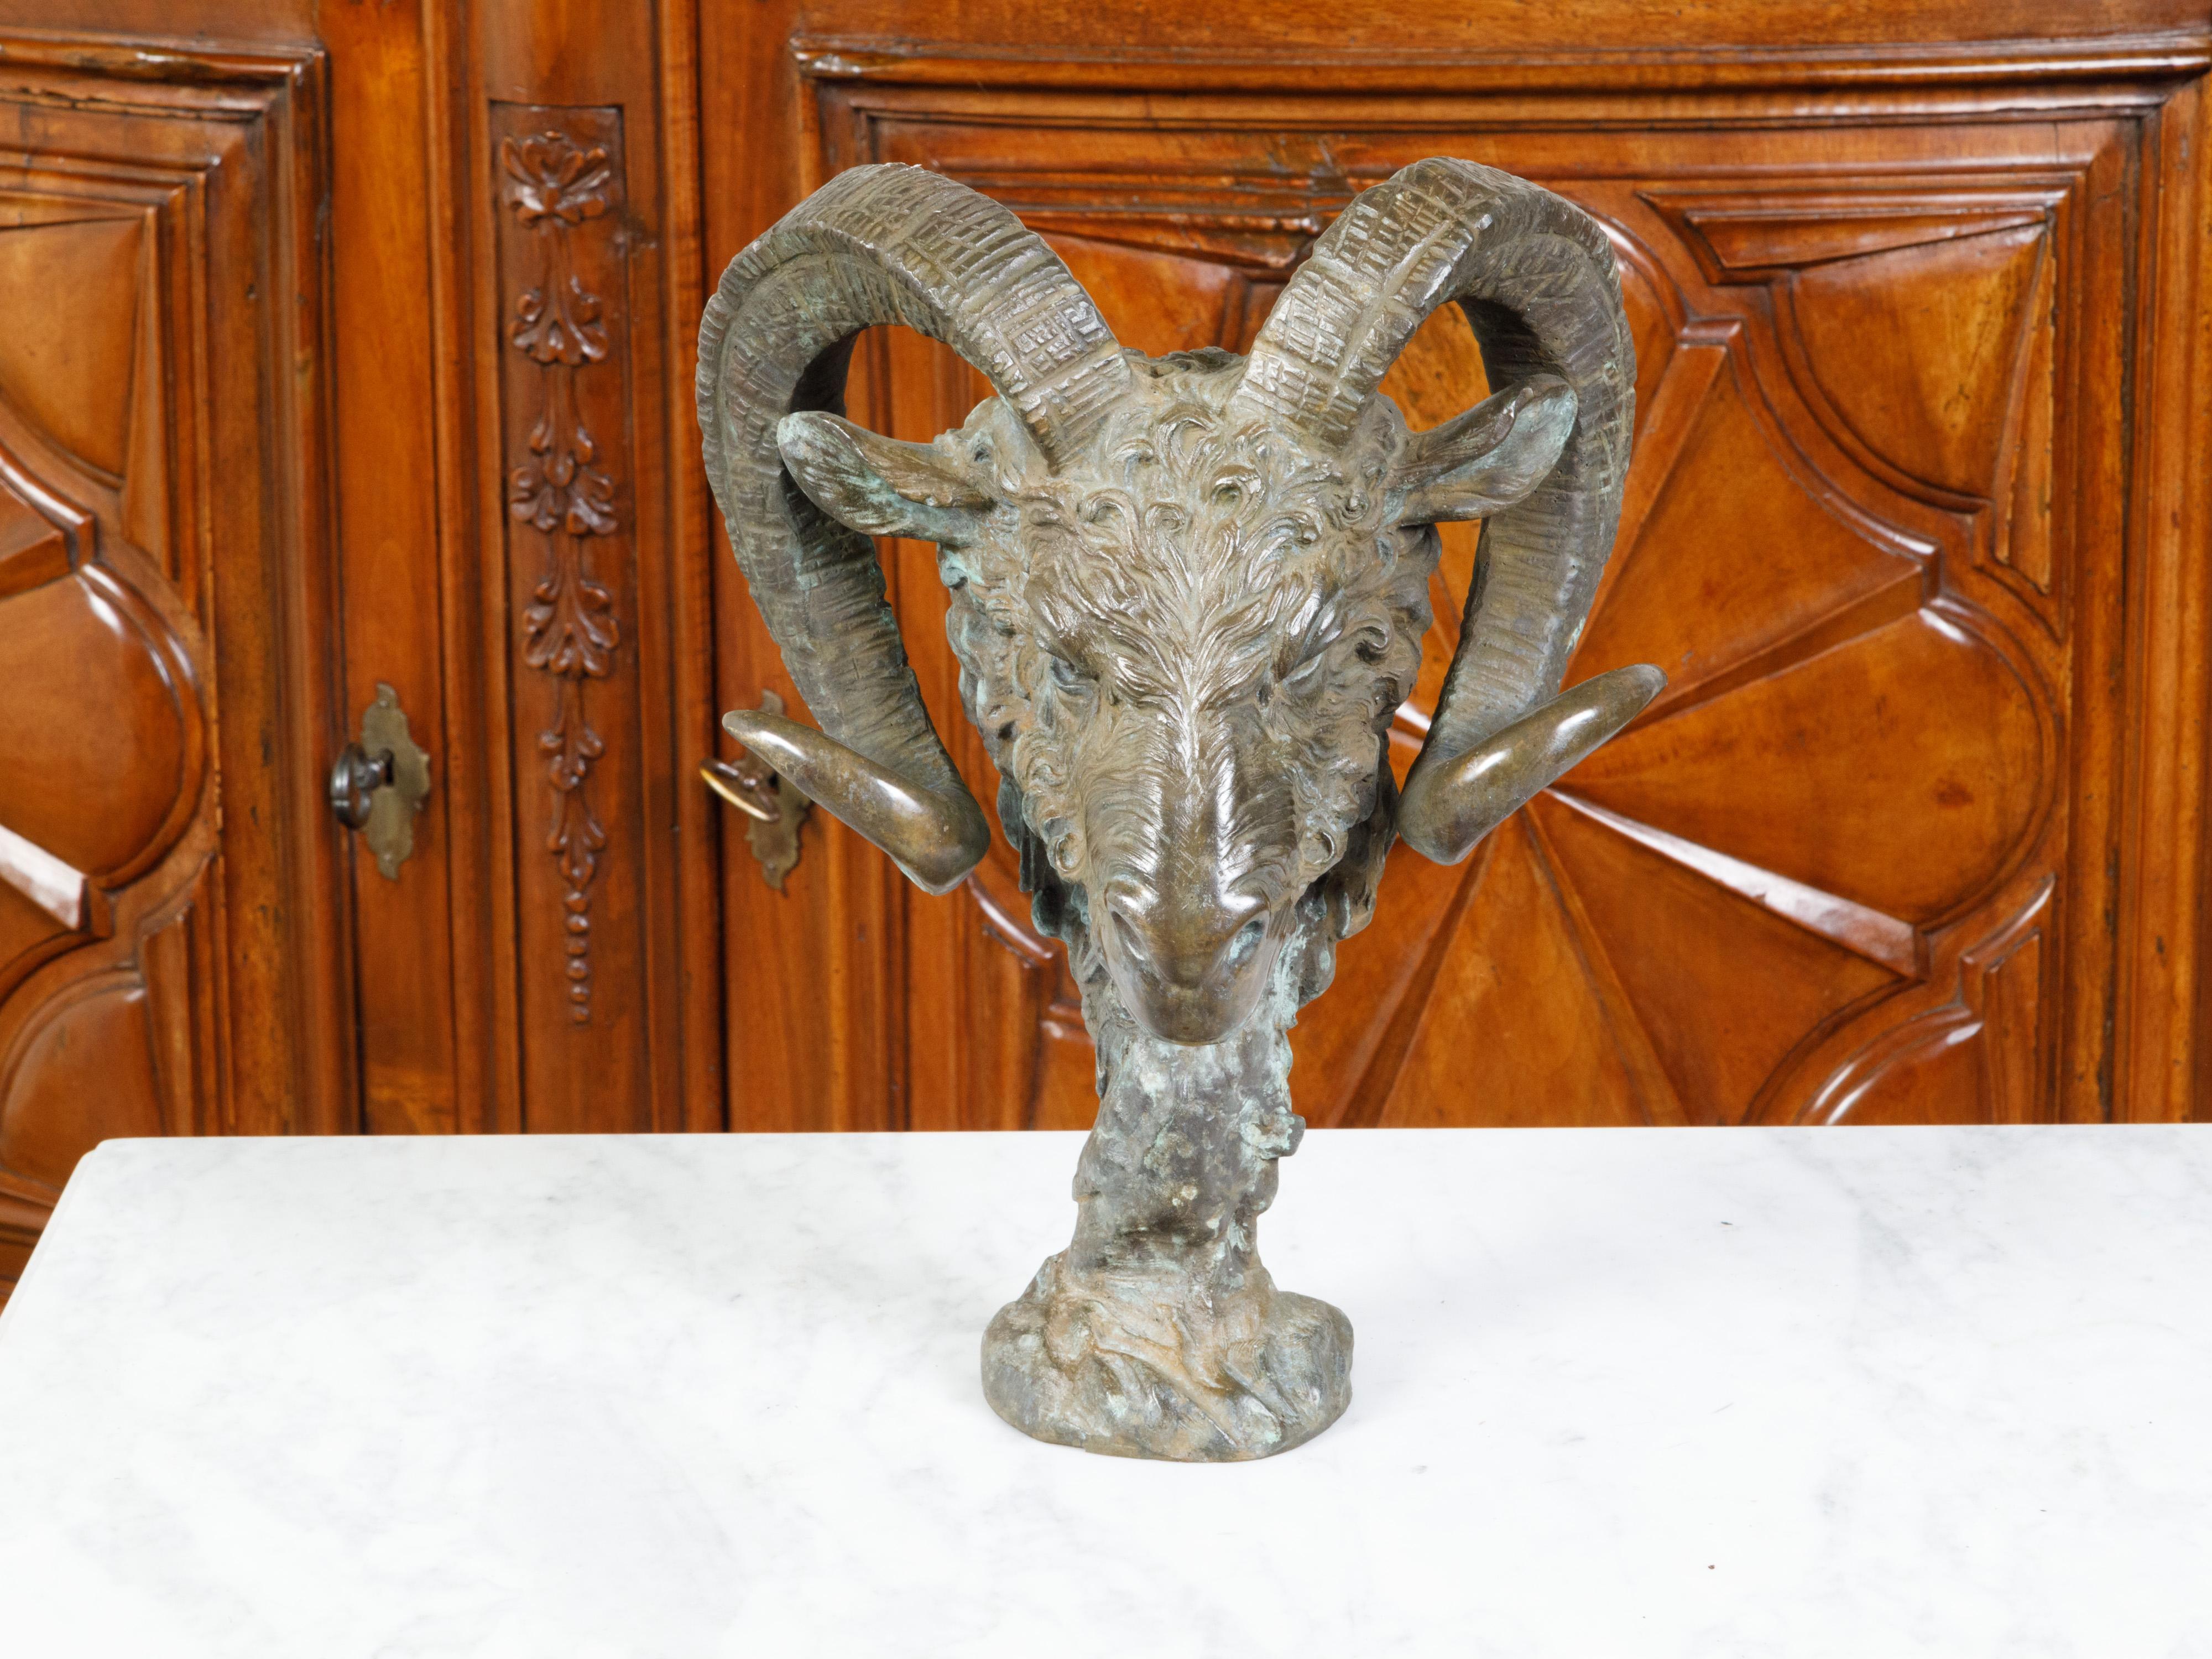 An Italian cast bronze sculpture from the mid 20th century, depicting a ram's head. Created in Italy during the Midcentury period, this bronze sculpture captures our attention with its striking depiction of a ram's head raised on a small base.